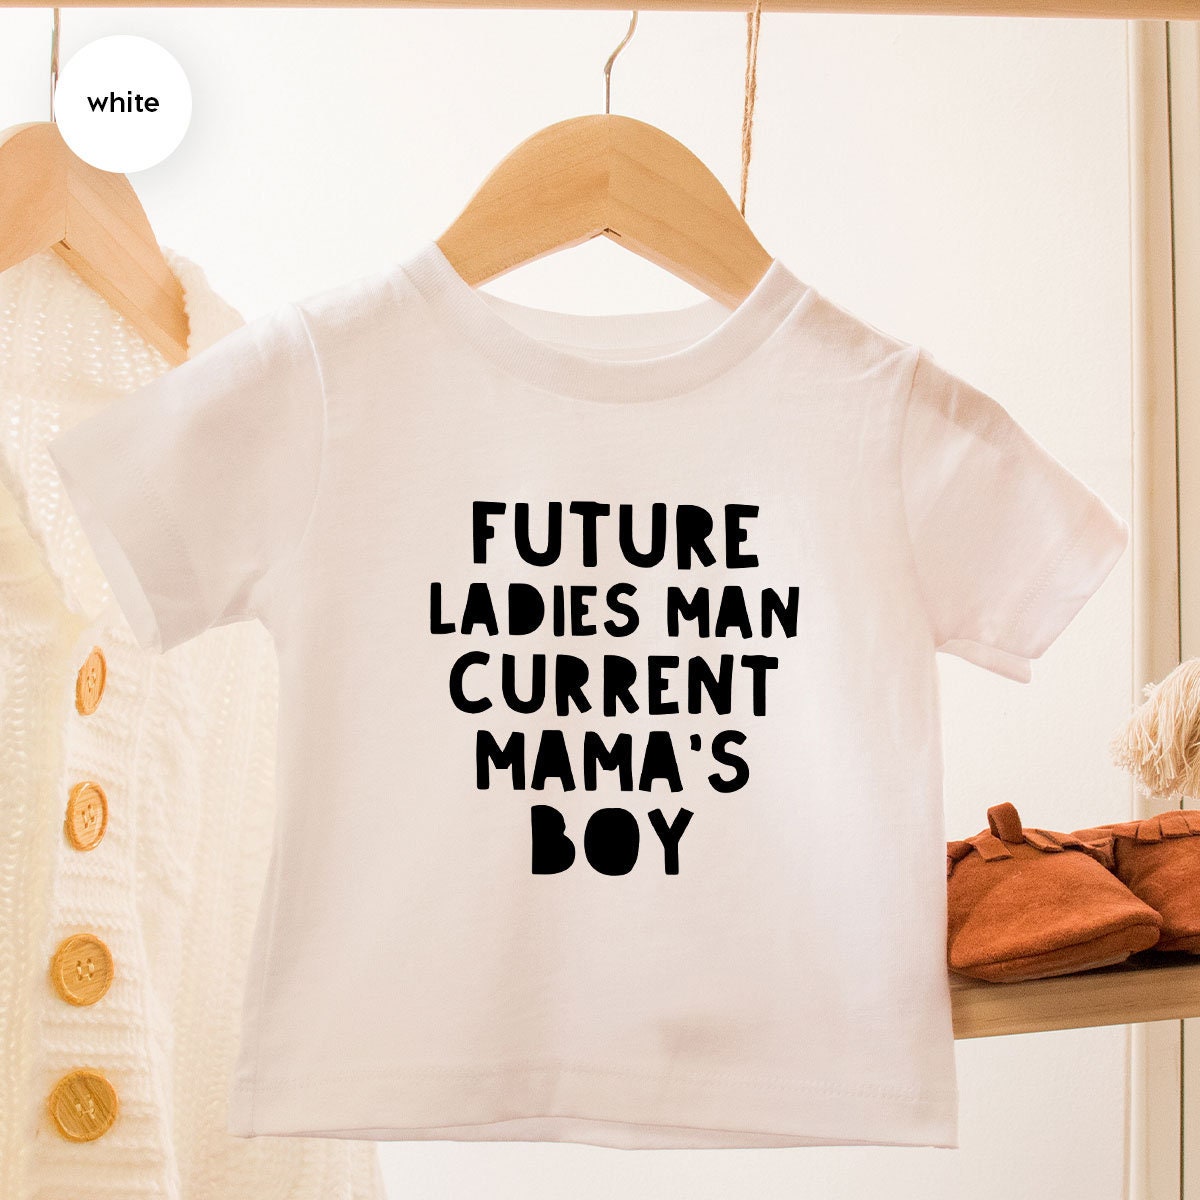 Cute Baby Bodysuit, Mothers Day Gift, Mamas Boy T Shirt, Funny Toddler TShirt, Future Ladies Man Current Mama's Boy Shirts, Boys Outfit - Fastdeliverytees.com